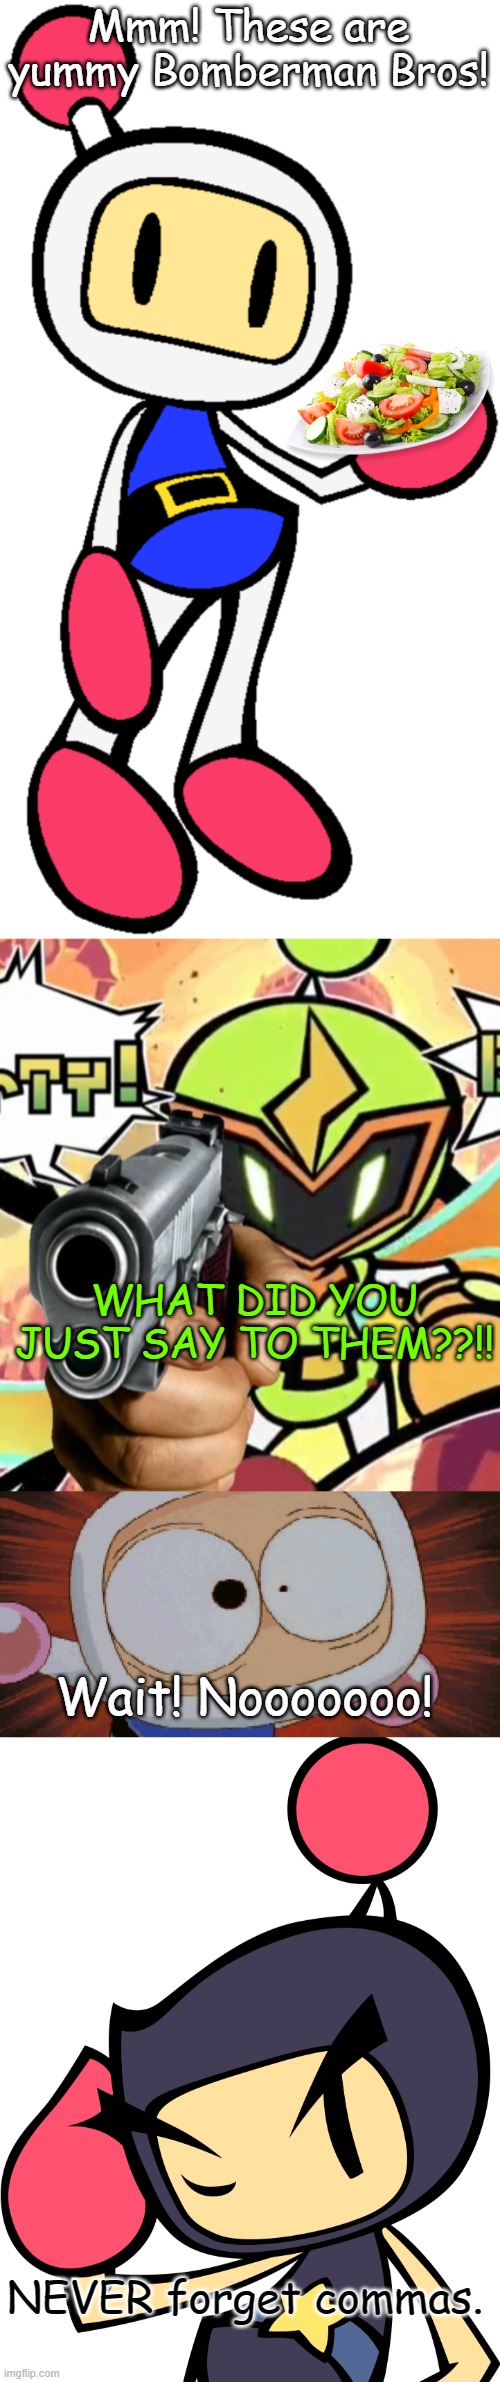 Mmm! These are yummy Bomberman Bros! WHAT DID YOU JUST SAY TO THEM??!! Wait! Nooooooo! NEVER forget commas. | image tagged in white bomber 5 super bomberman r,plasma bomber has a freaking gun,white bomber scared,bad grammar and spelling memes | made w/ Imgflip meme maker